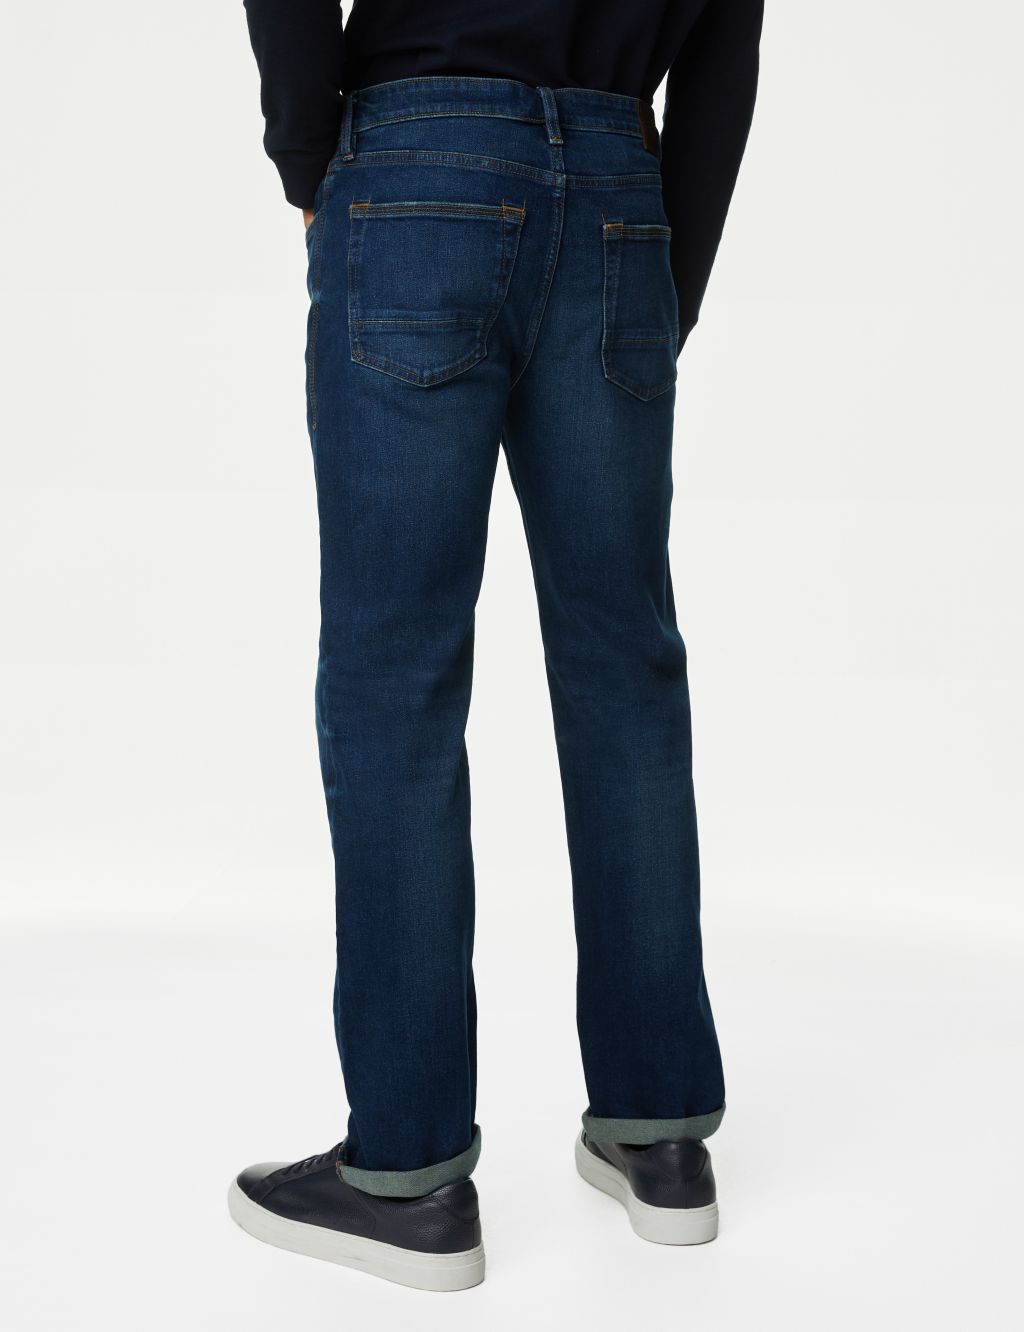 Straight Fit Vintage Wash Stretch Jeans image 5